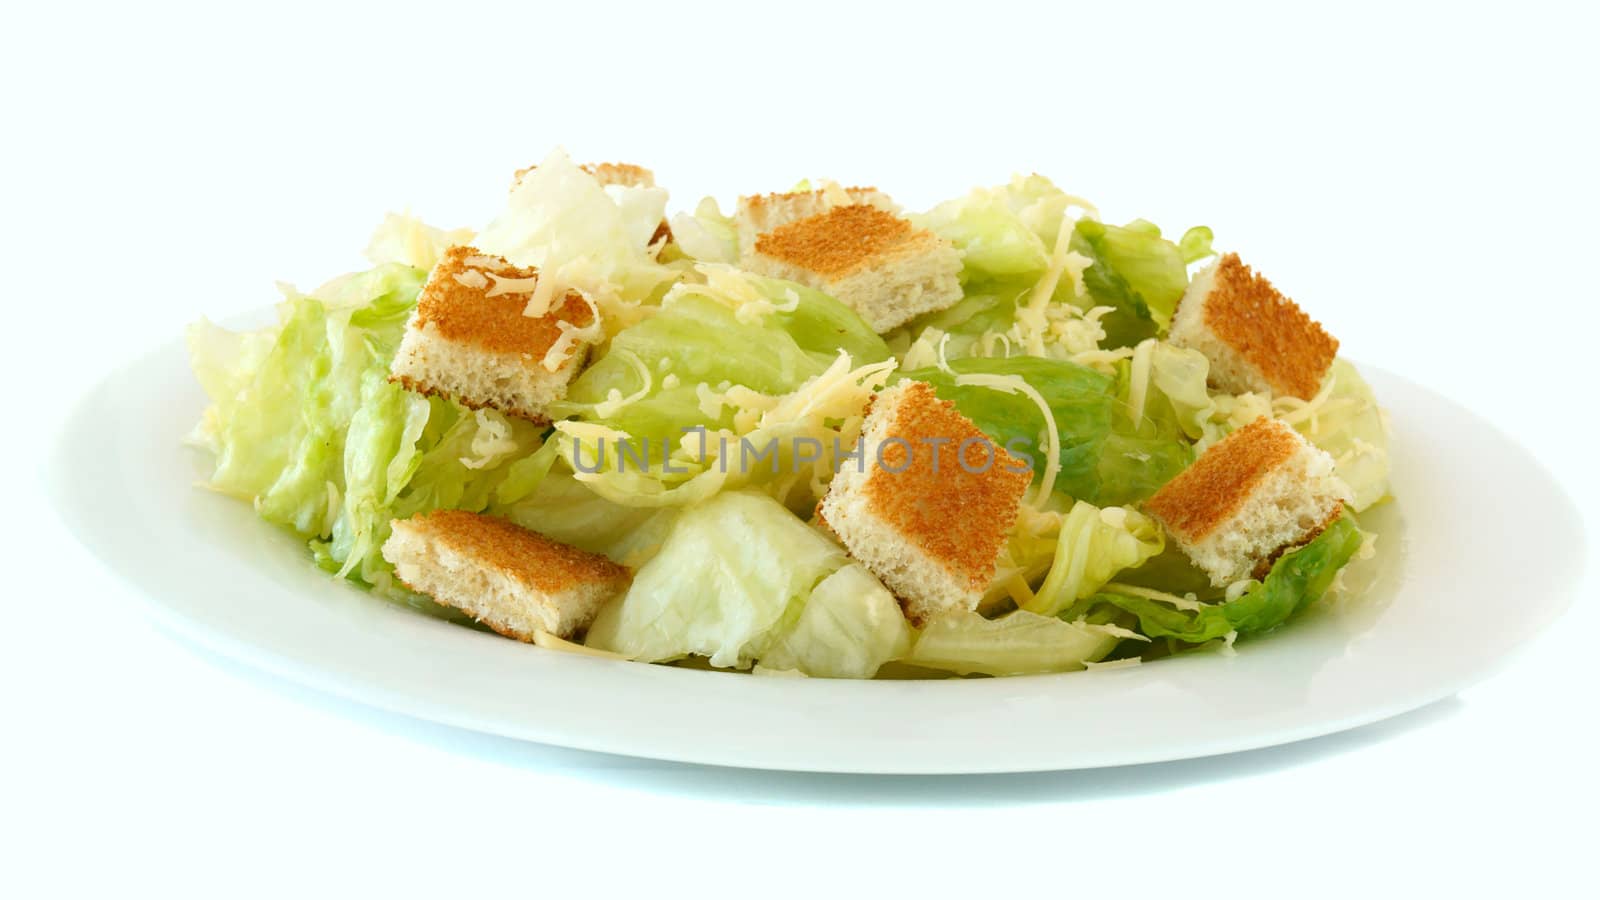 Caesar salad on white plate isolated on white background